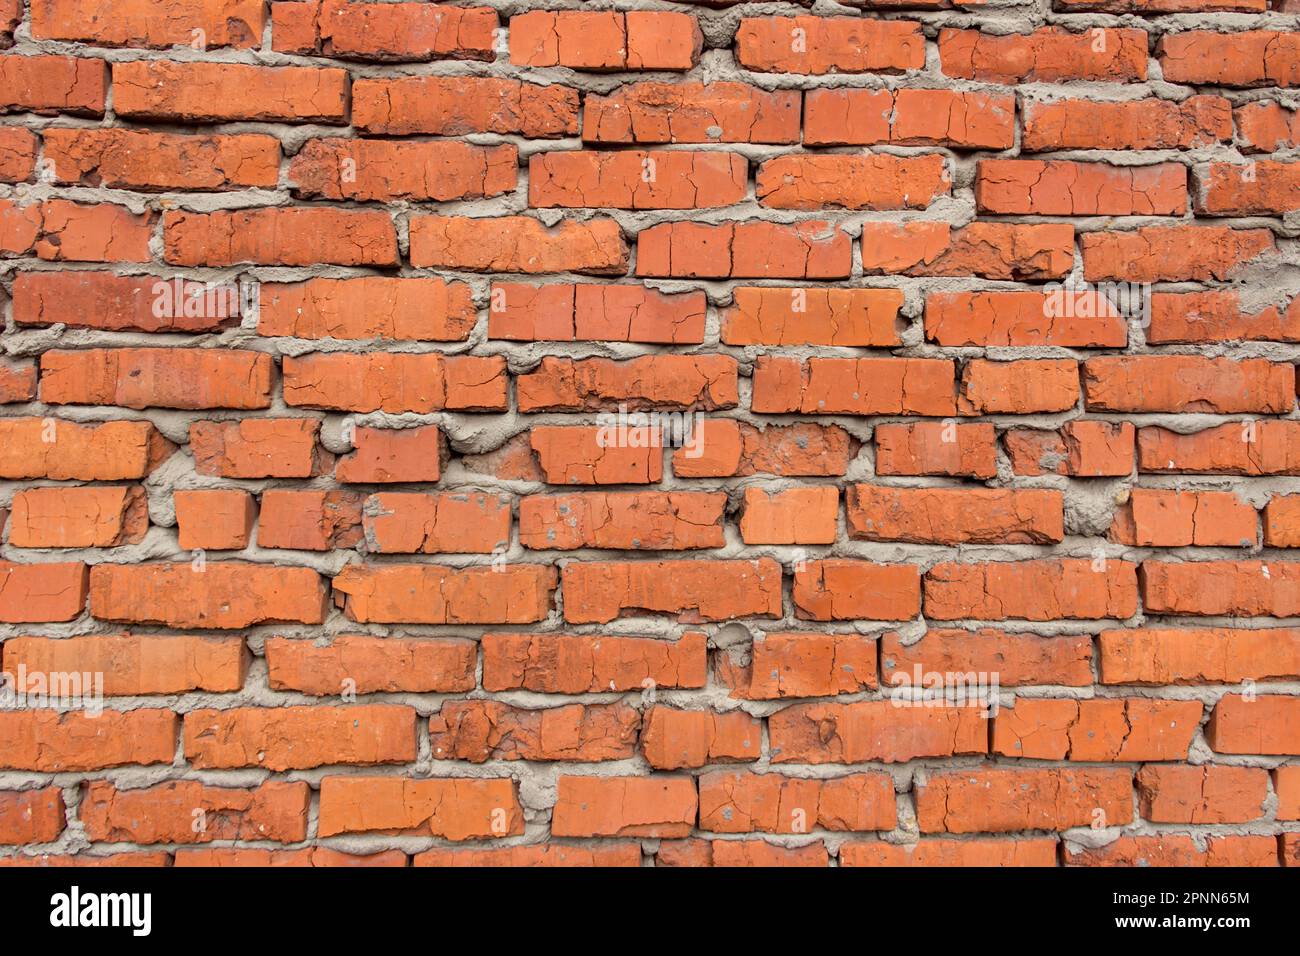 Fragment of a brick wall of an old red brick building. Background for text Stock Photo